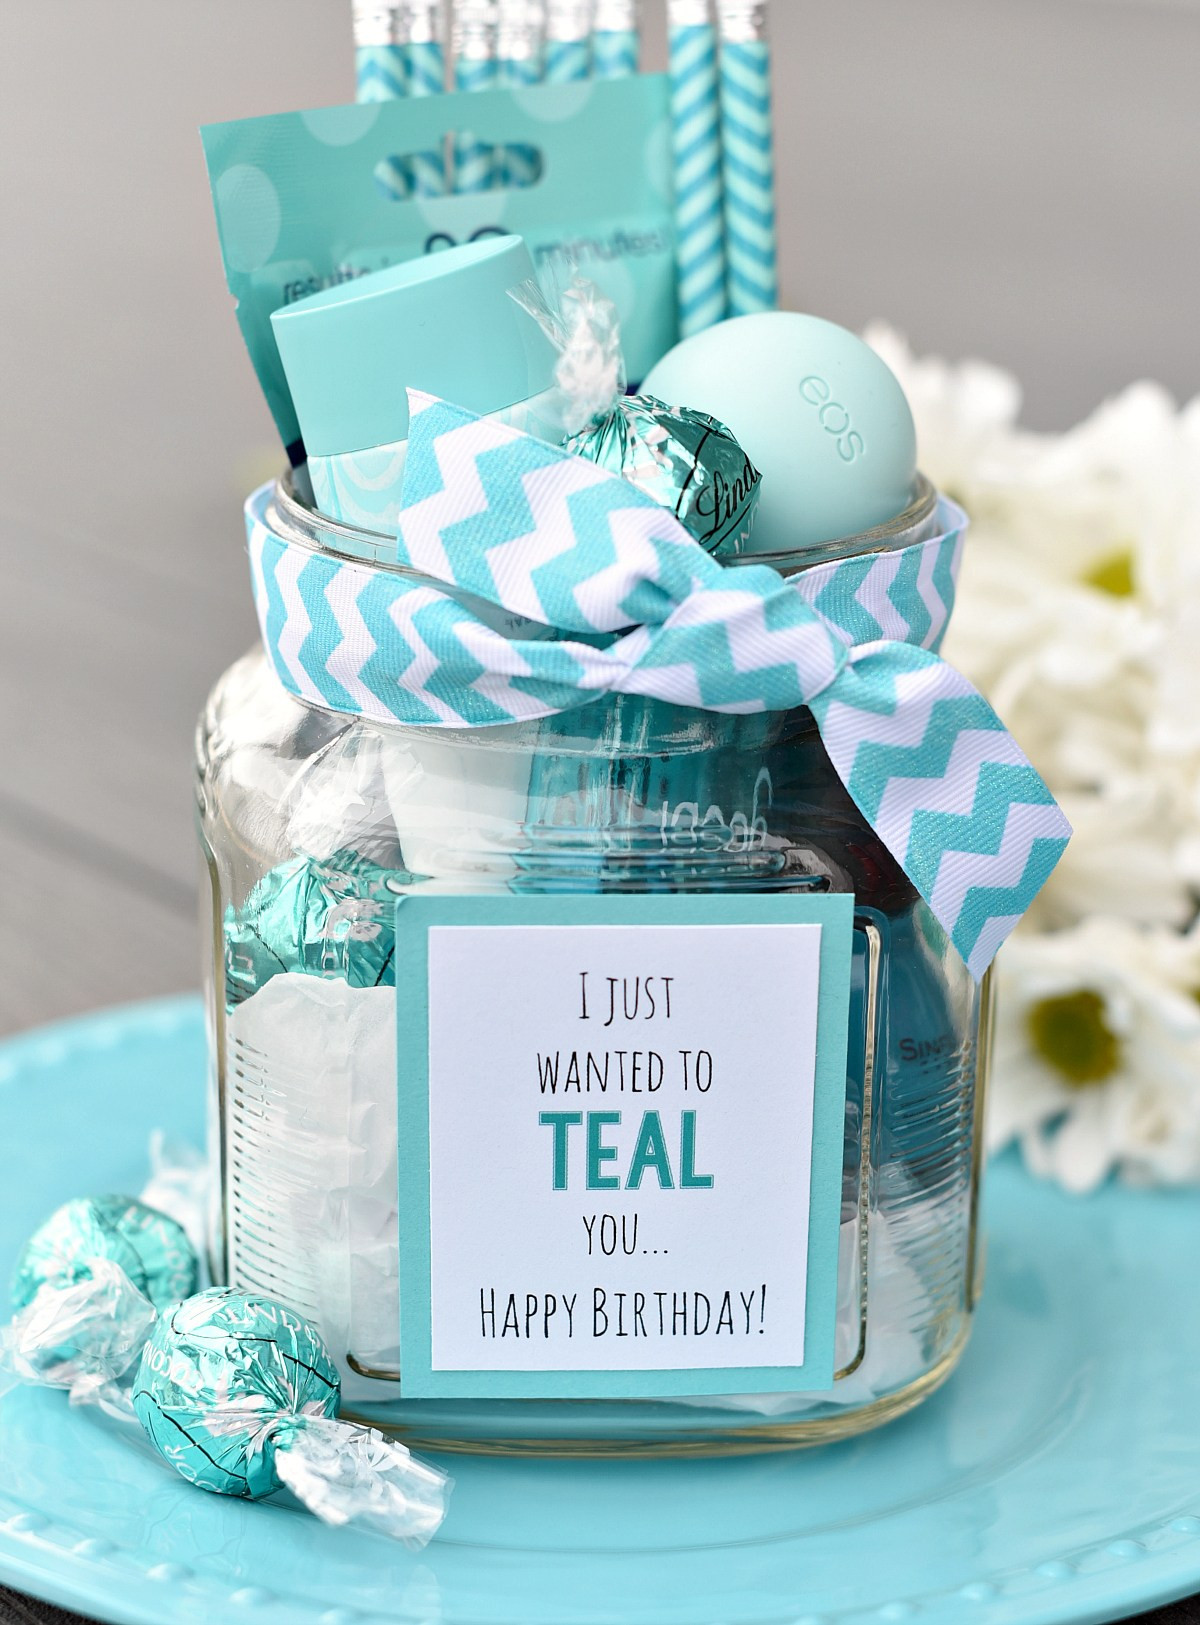 Cute Birthday Gifts
 Teal Birthday Gift Idea for Friends – Fun Squared